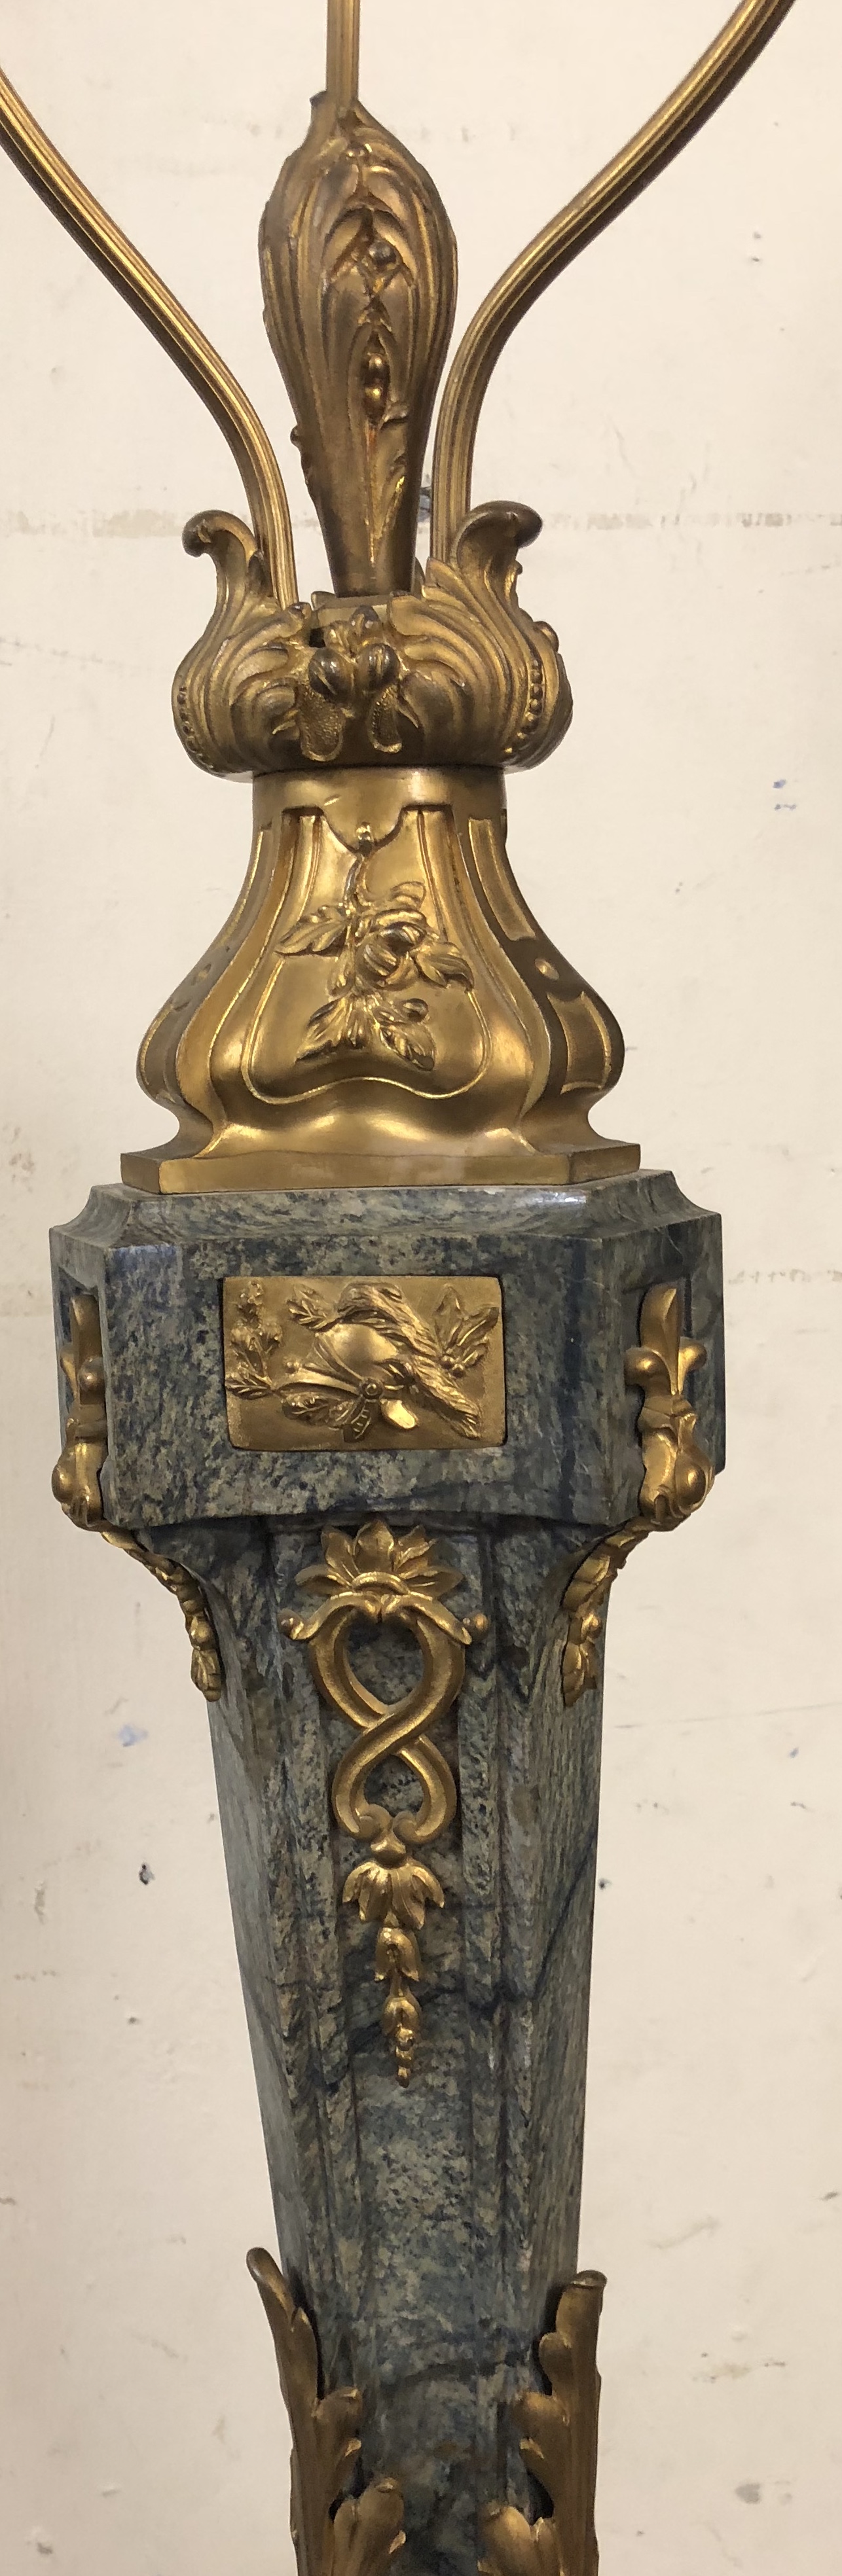 A LARGE A19TH CENTURY GREEN MARBLE AND GILT BRONZE TABLE LAMP Applied with plaques and foliage on - Image 3 of 4